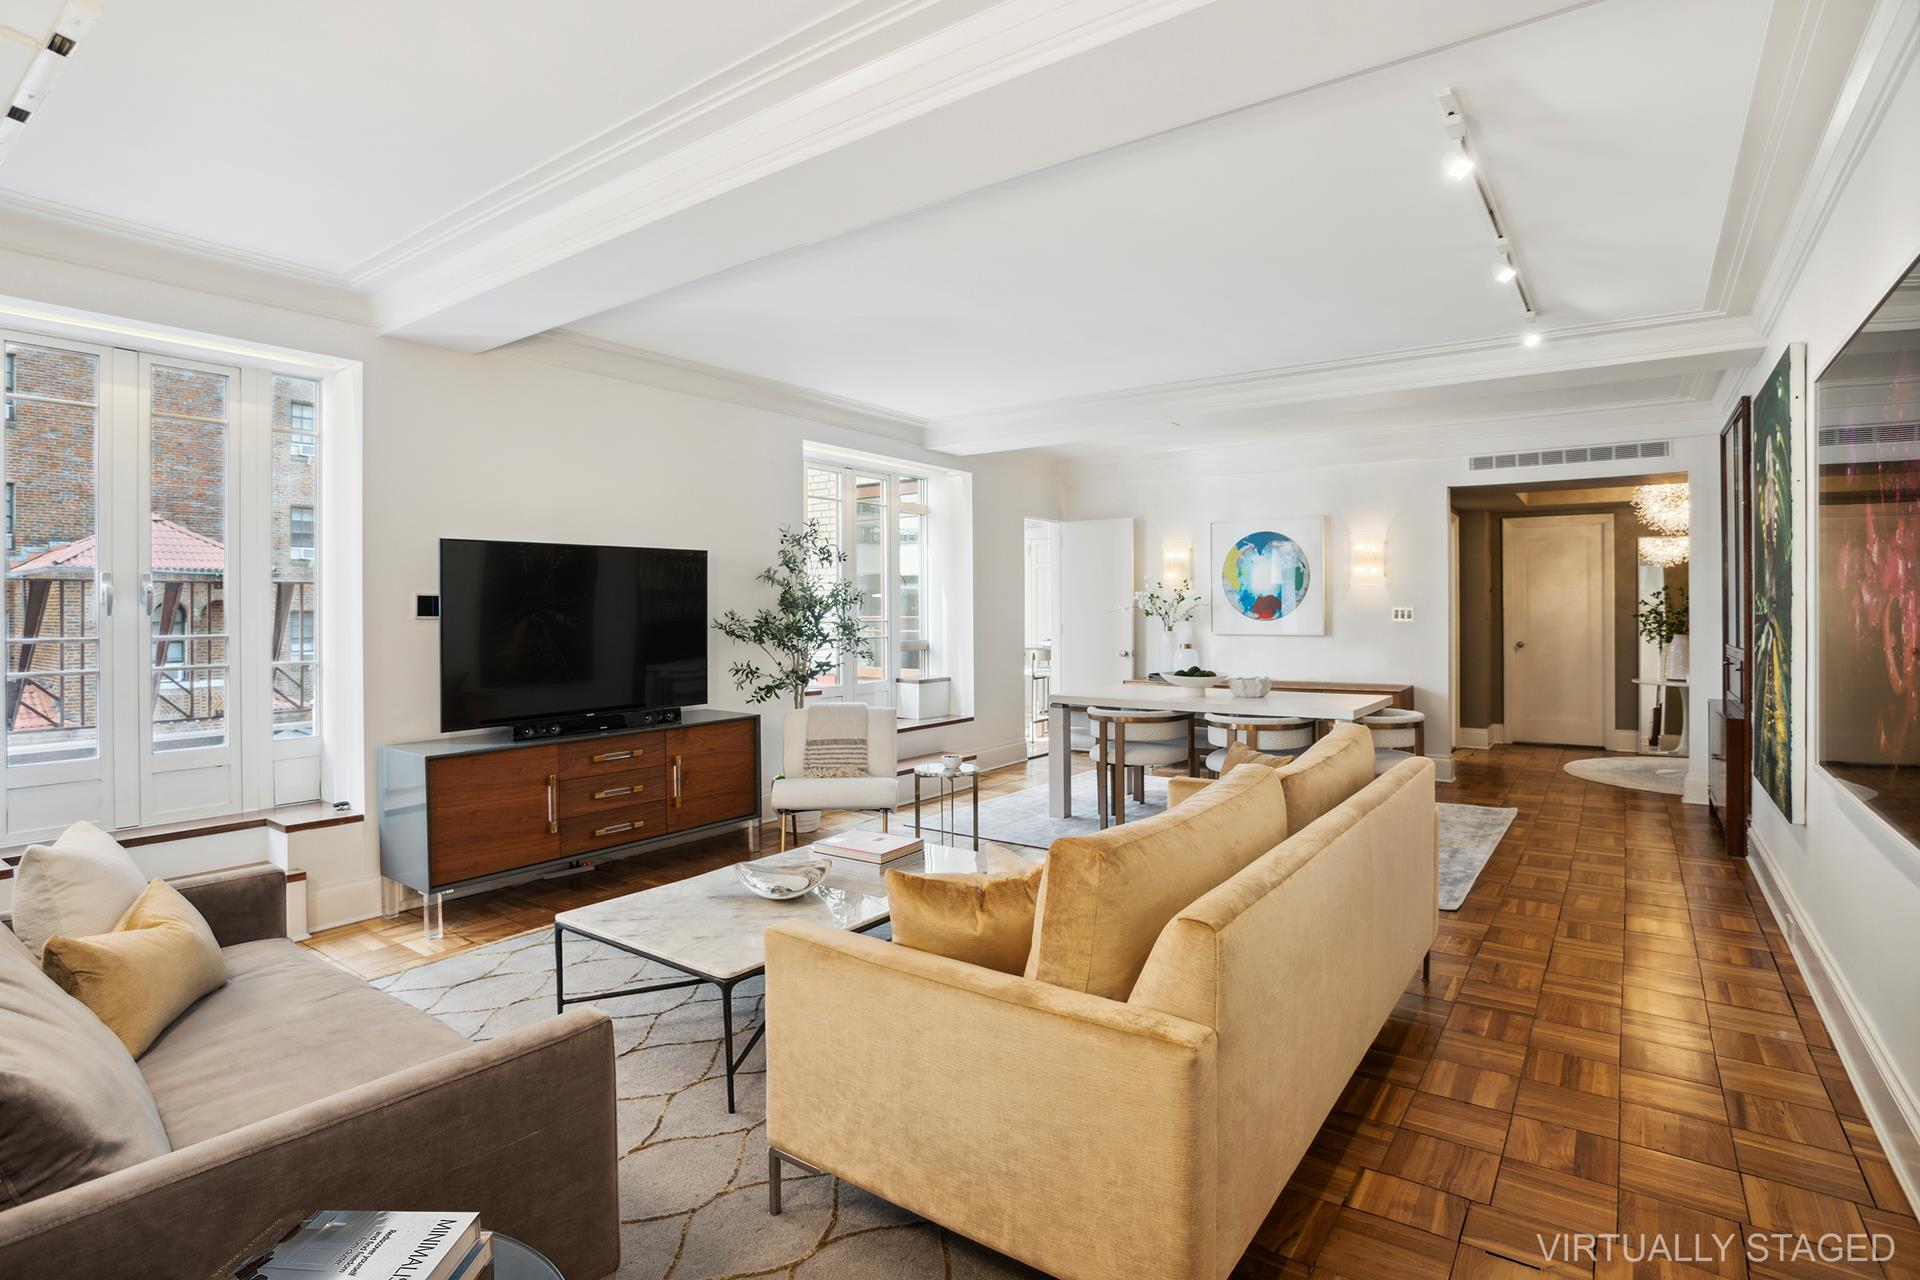 25 Central Park 10Yz, Lincoln Sq, Upper West Side, NYC - 3 Bedrooms  
3 Bathrooms  
8 Rooms - 